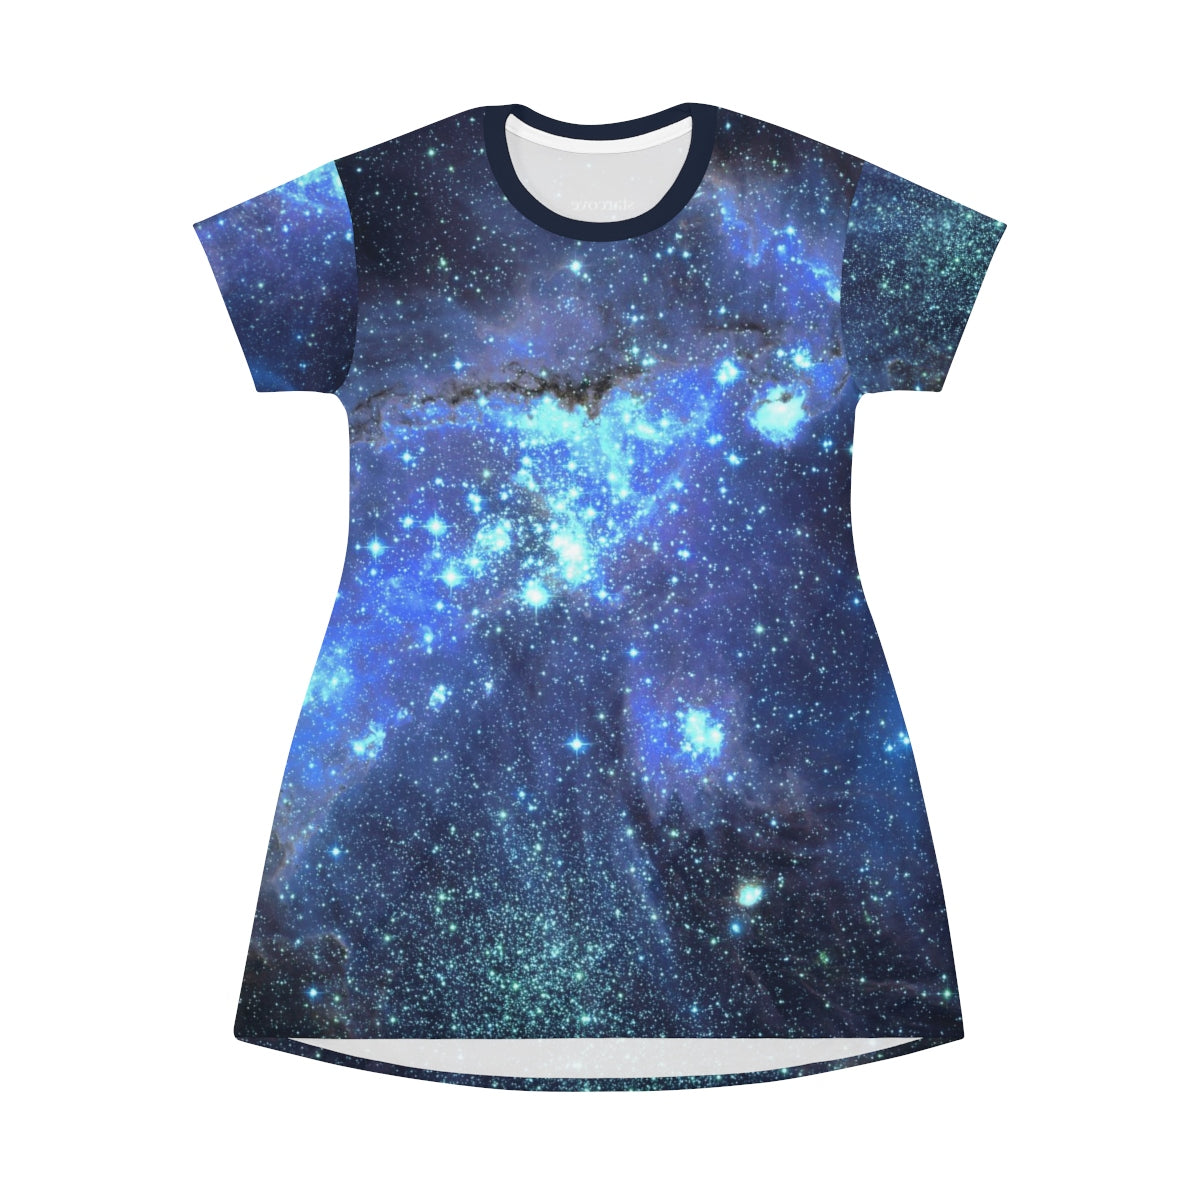 Space Galaxy T-shirt Dress, Blue Celestial Constellation Outer Space Star Print Festival Party Night Sky Casual Summer Cover Up Dress Starcove Fashion